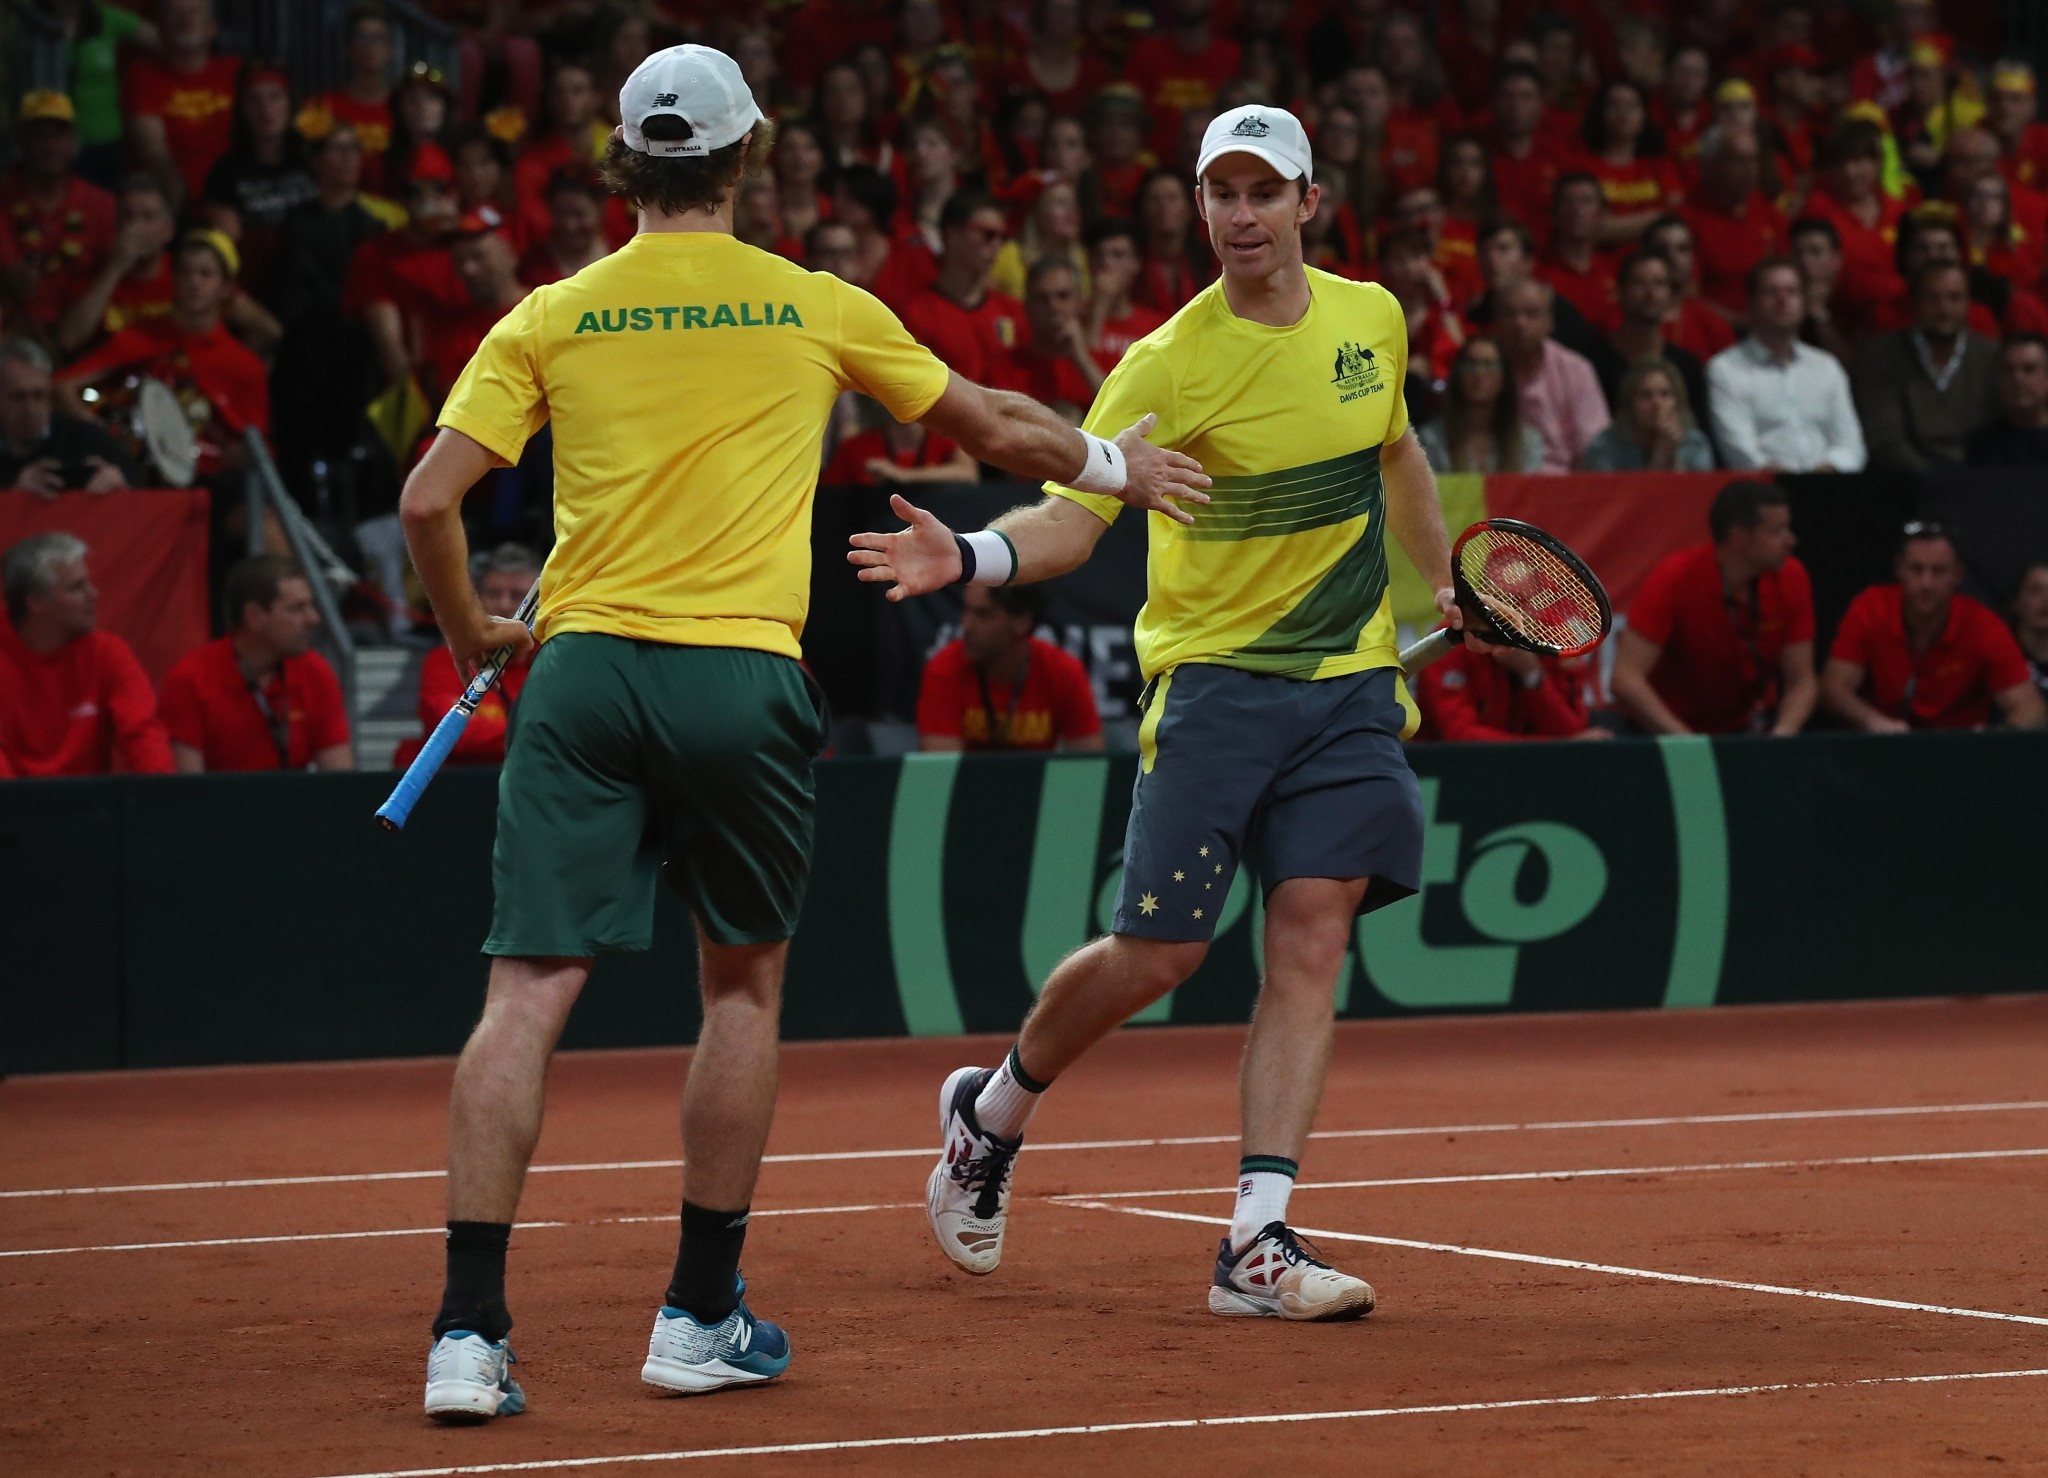 Australia lead Belgium 2-1 in their Davis Cup semi-final following today's doubles action ©Getty Images